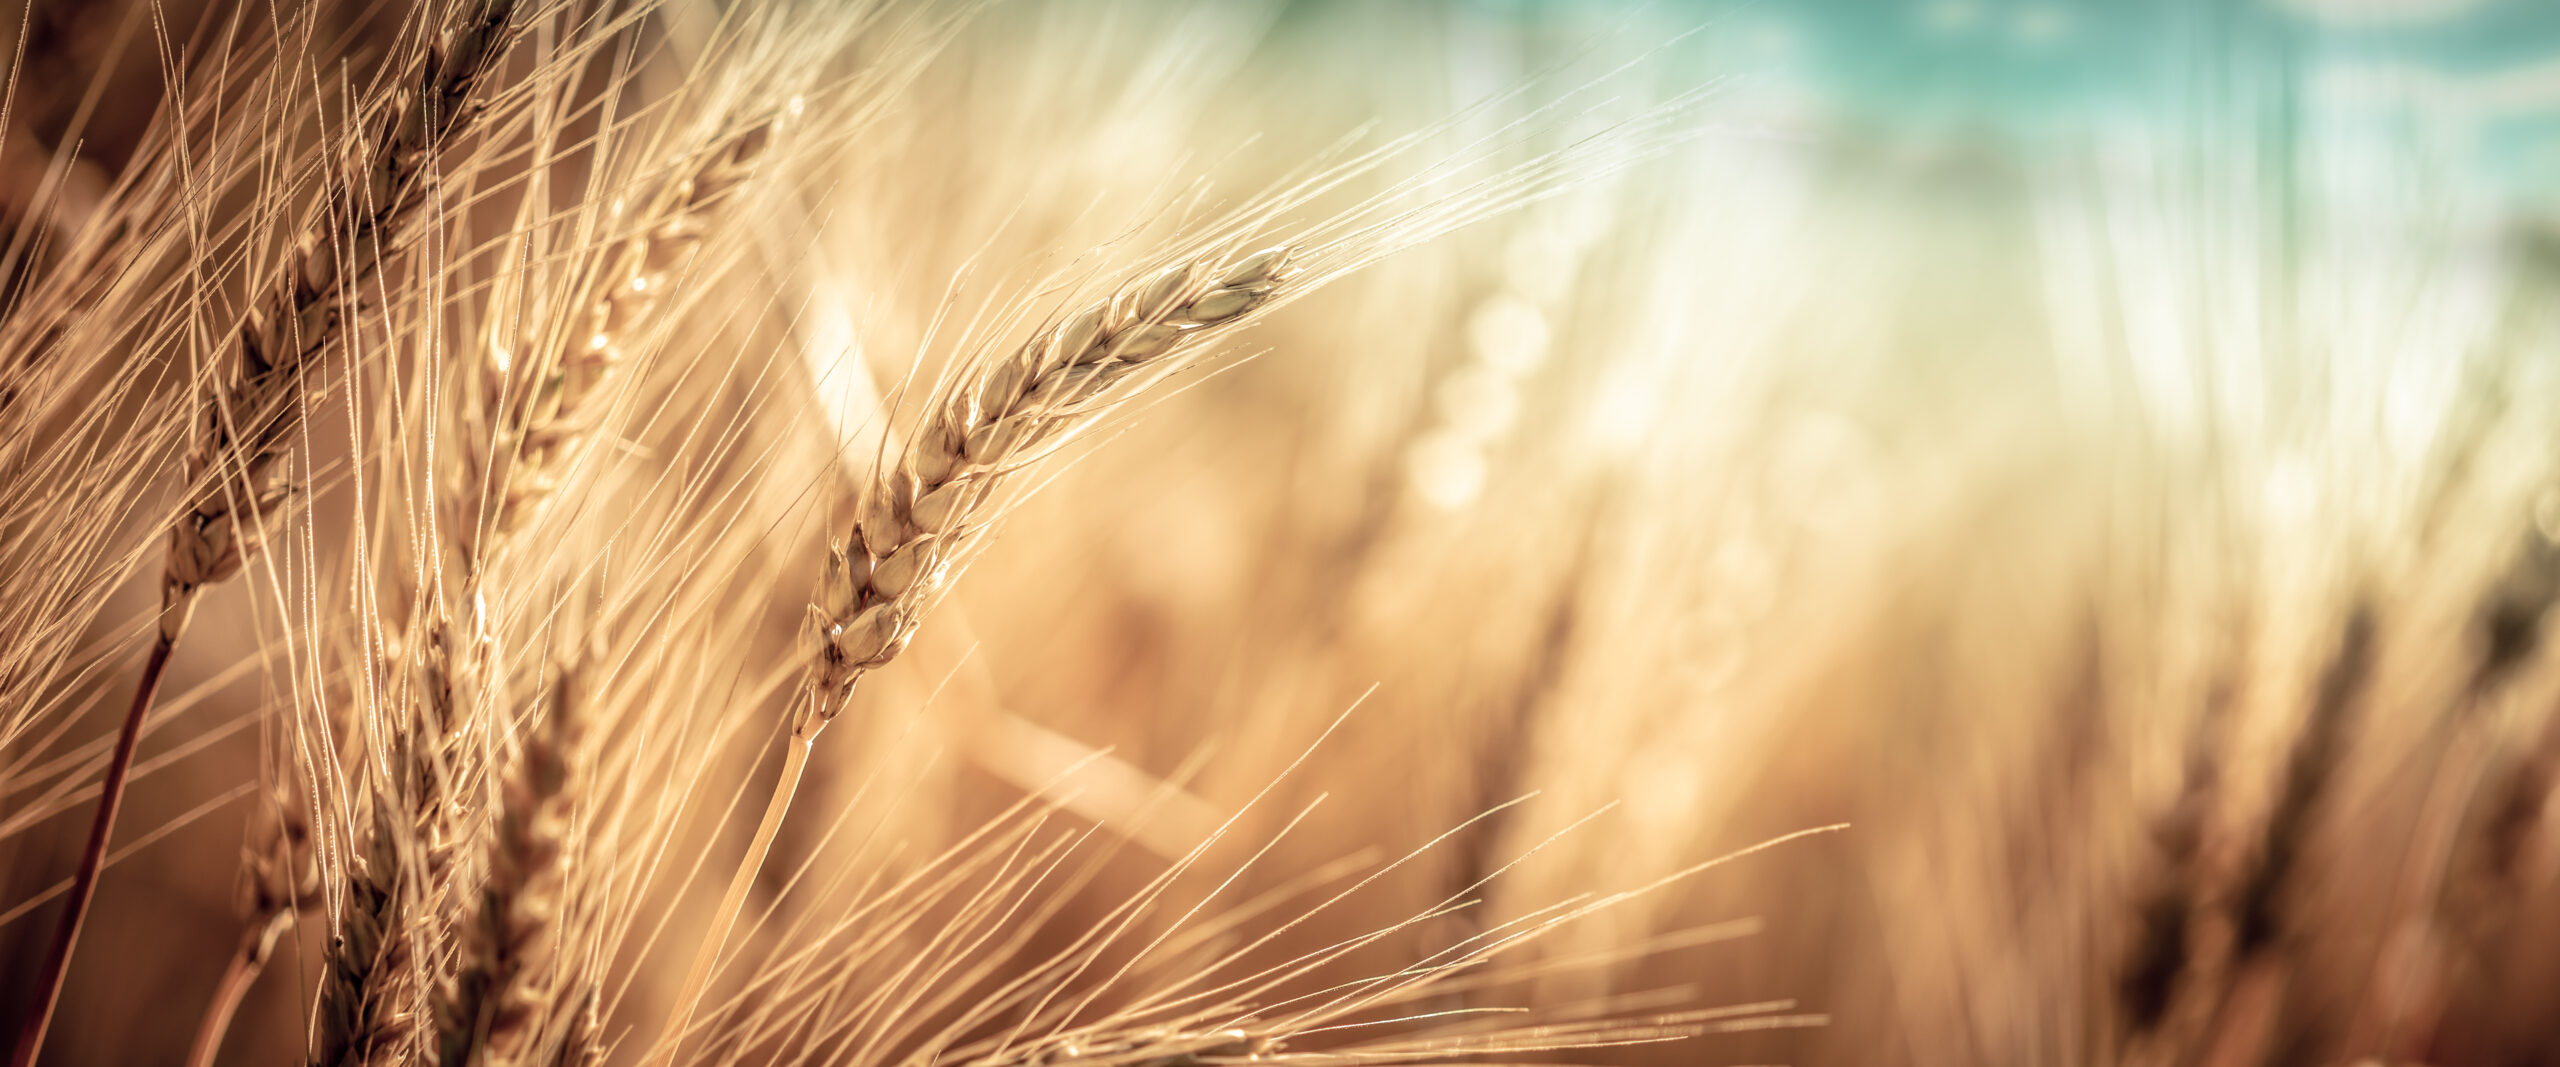 Close-up Of Ripe Golden Wheat With Vintage Effect, Clouds And Sk